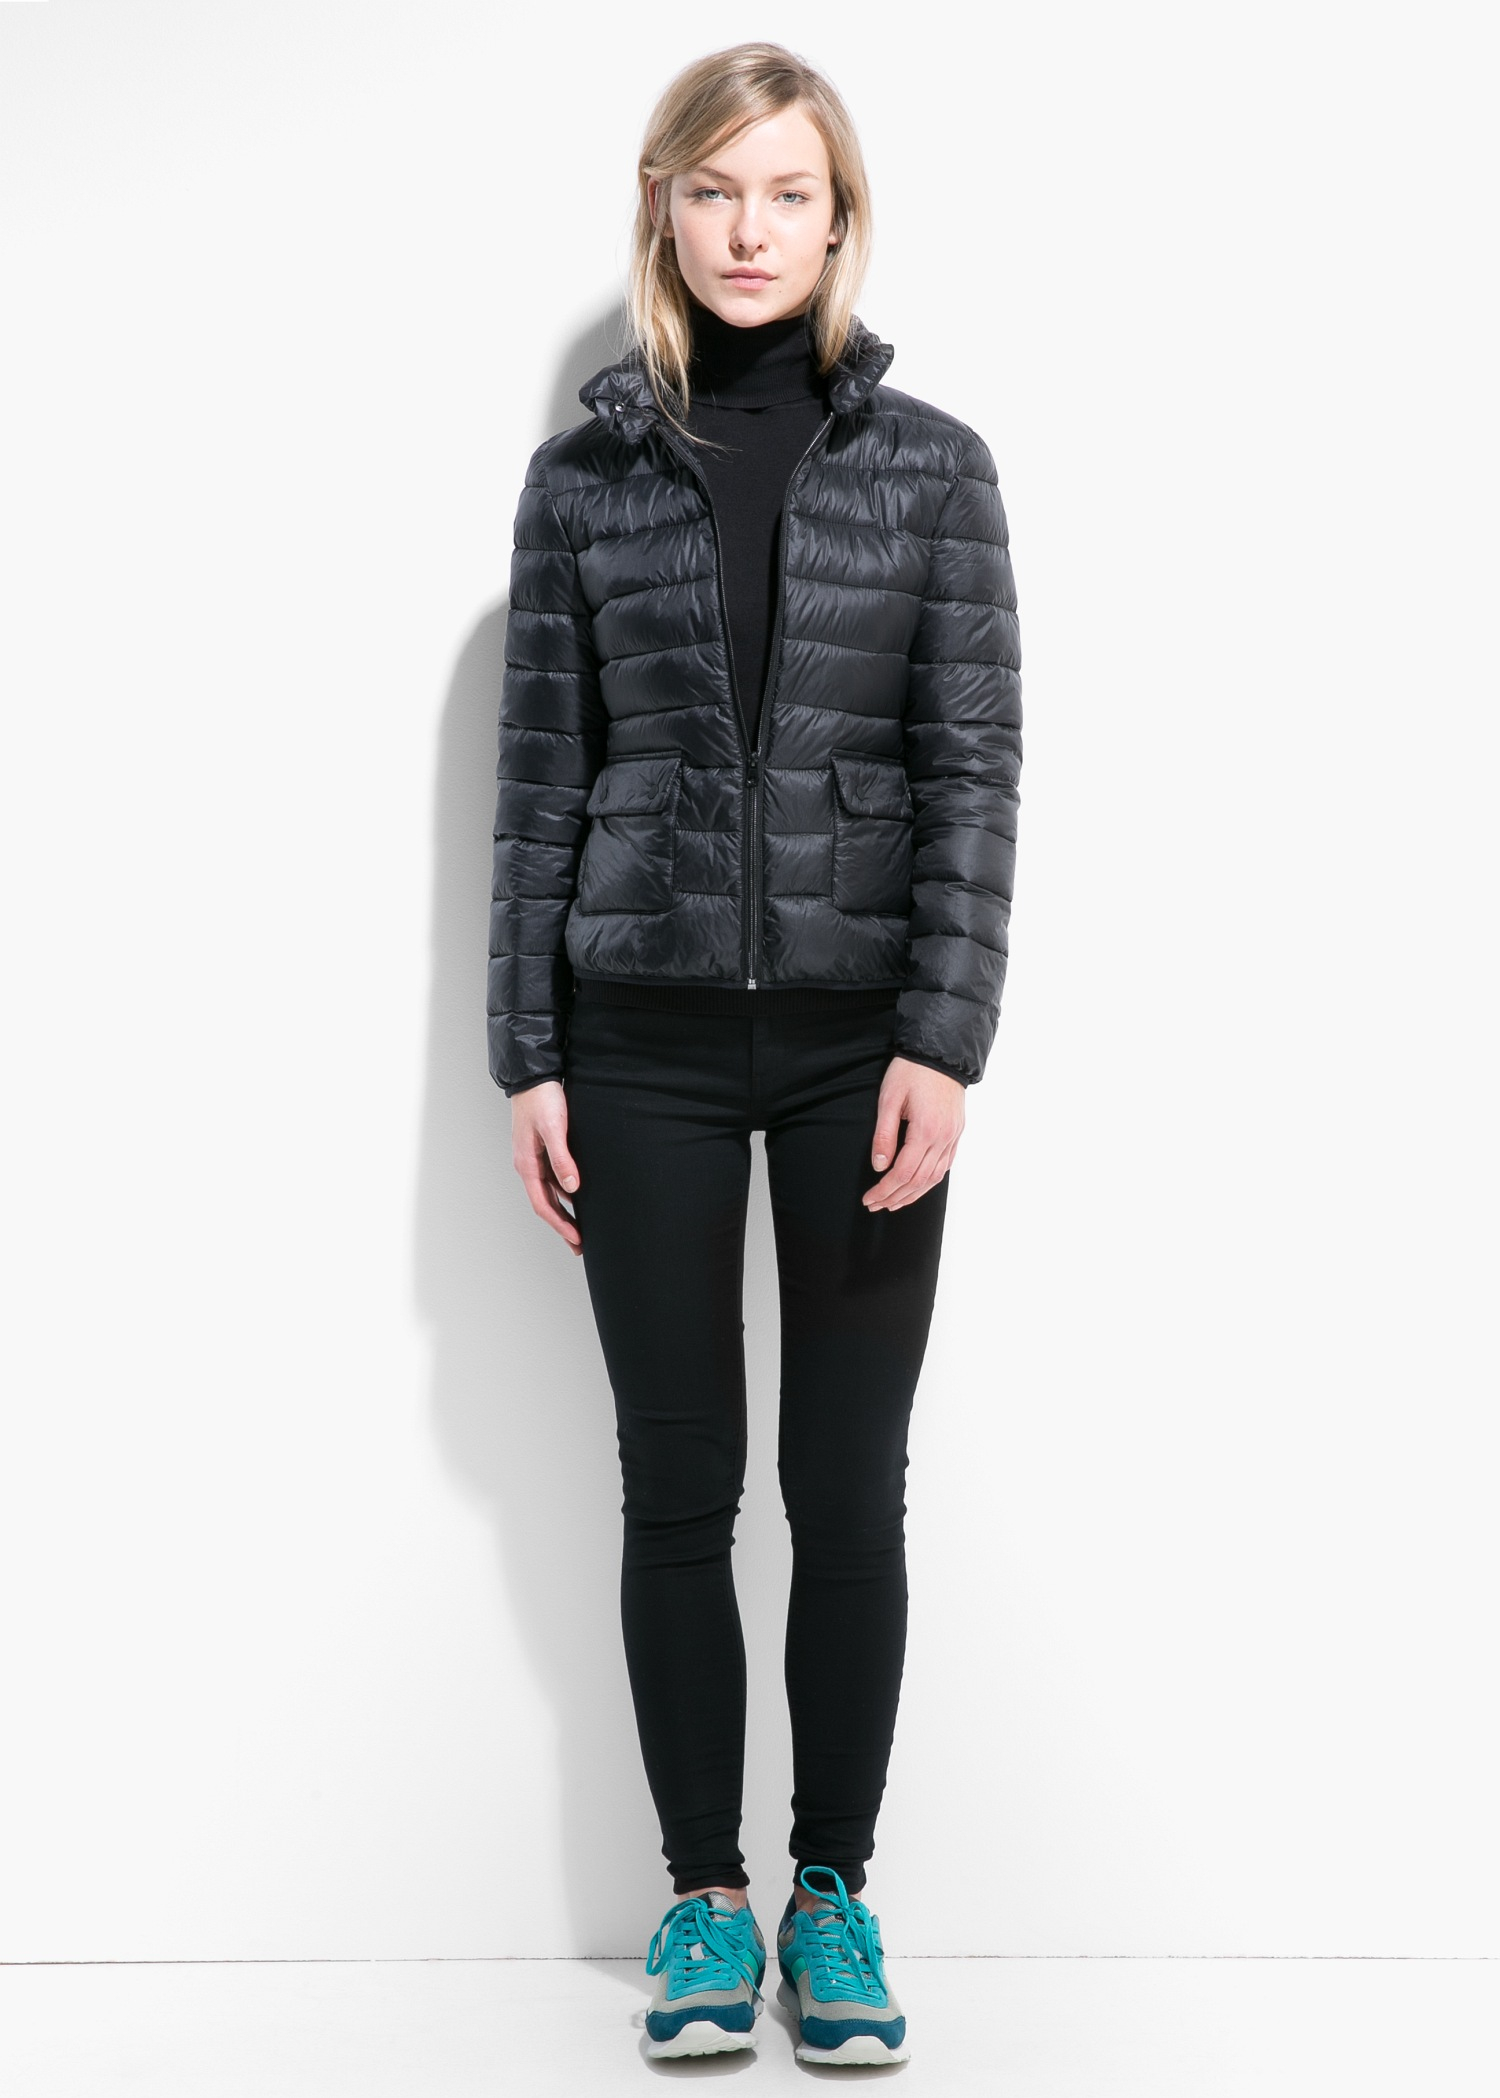 Mango Foldable Feather Down Jacket in Black | Lyst